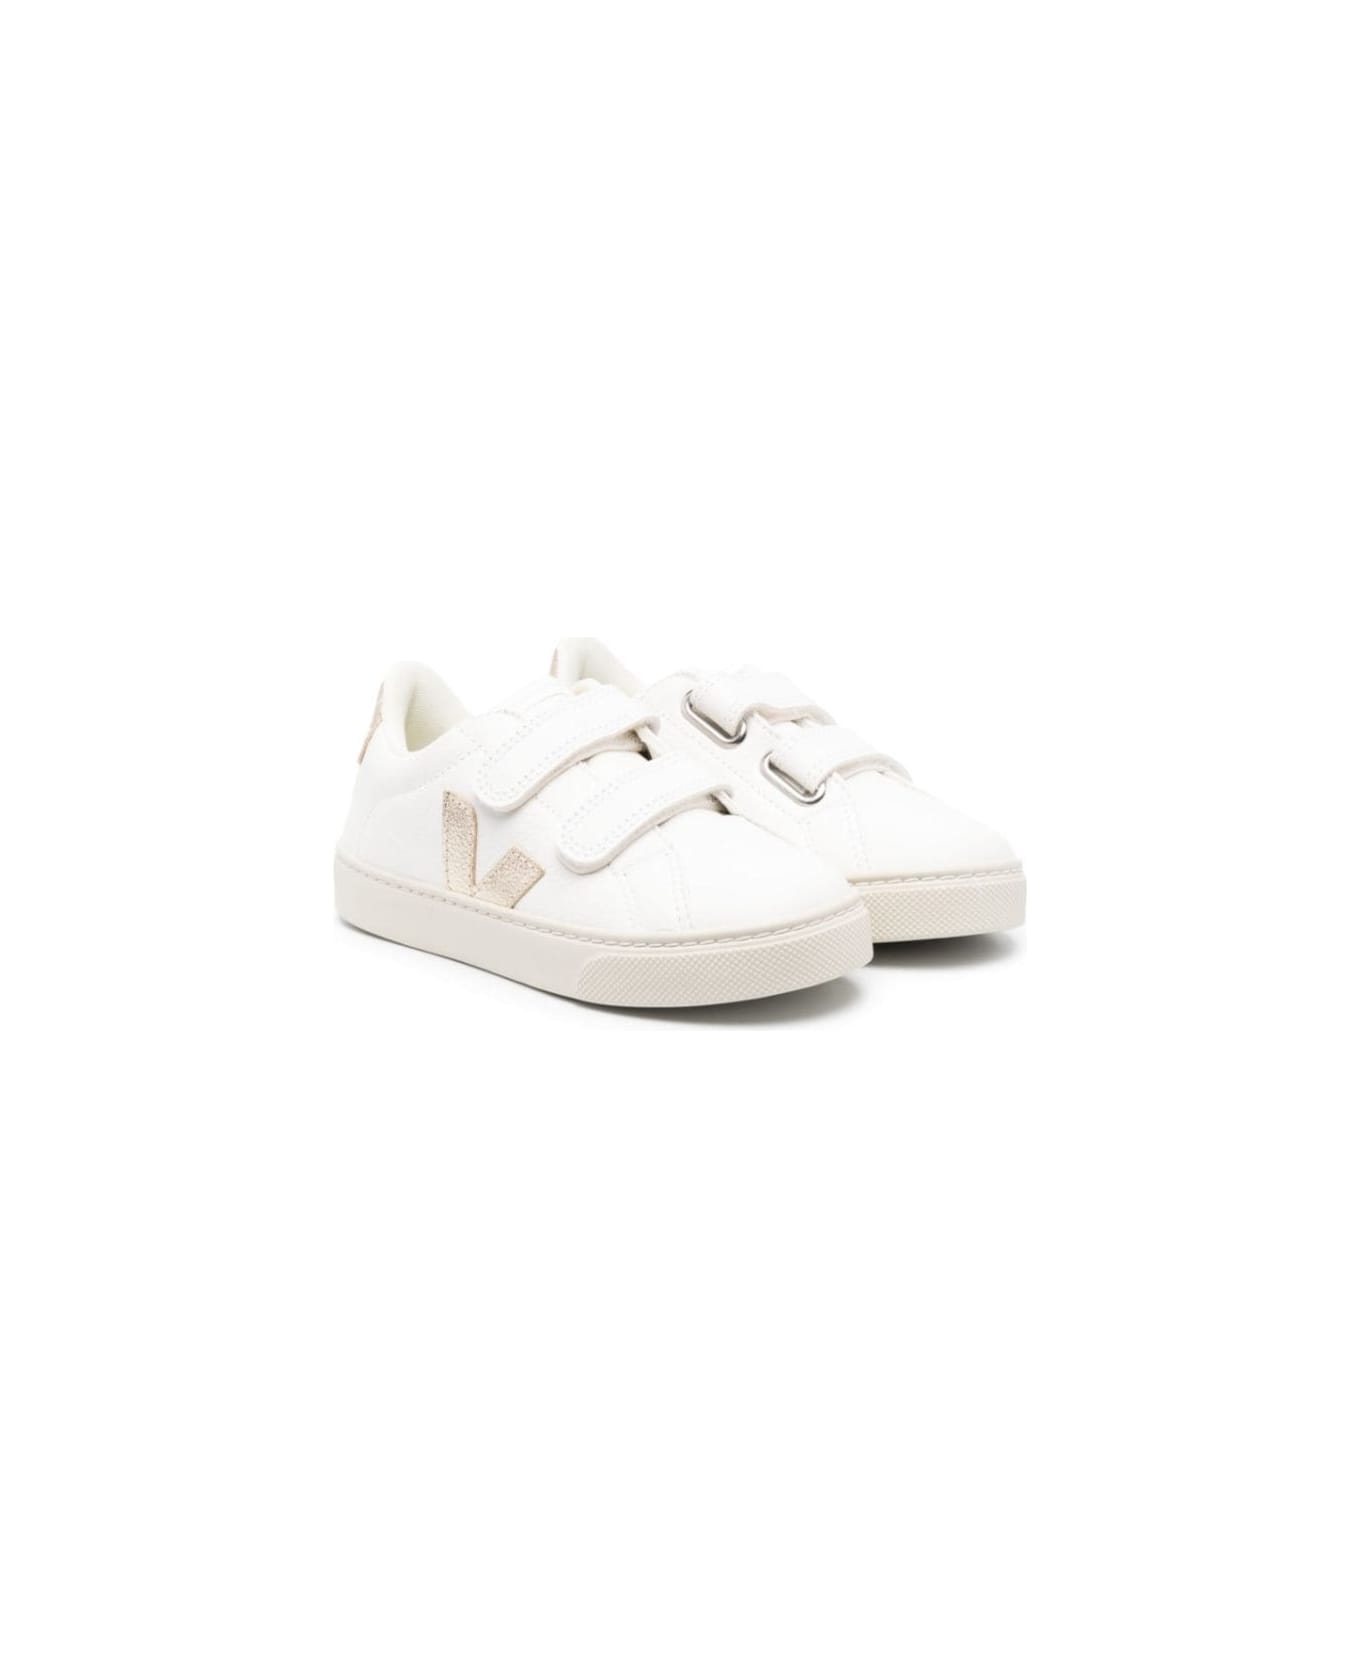 Veja White Sneaker With Platinum Logo And Heel Tab In Leather Girl - White シューズ